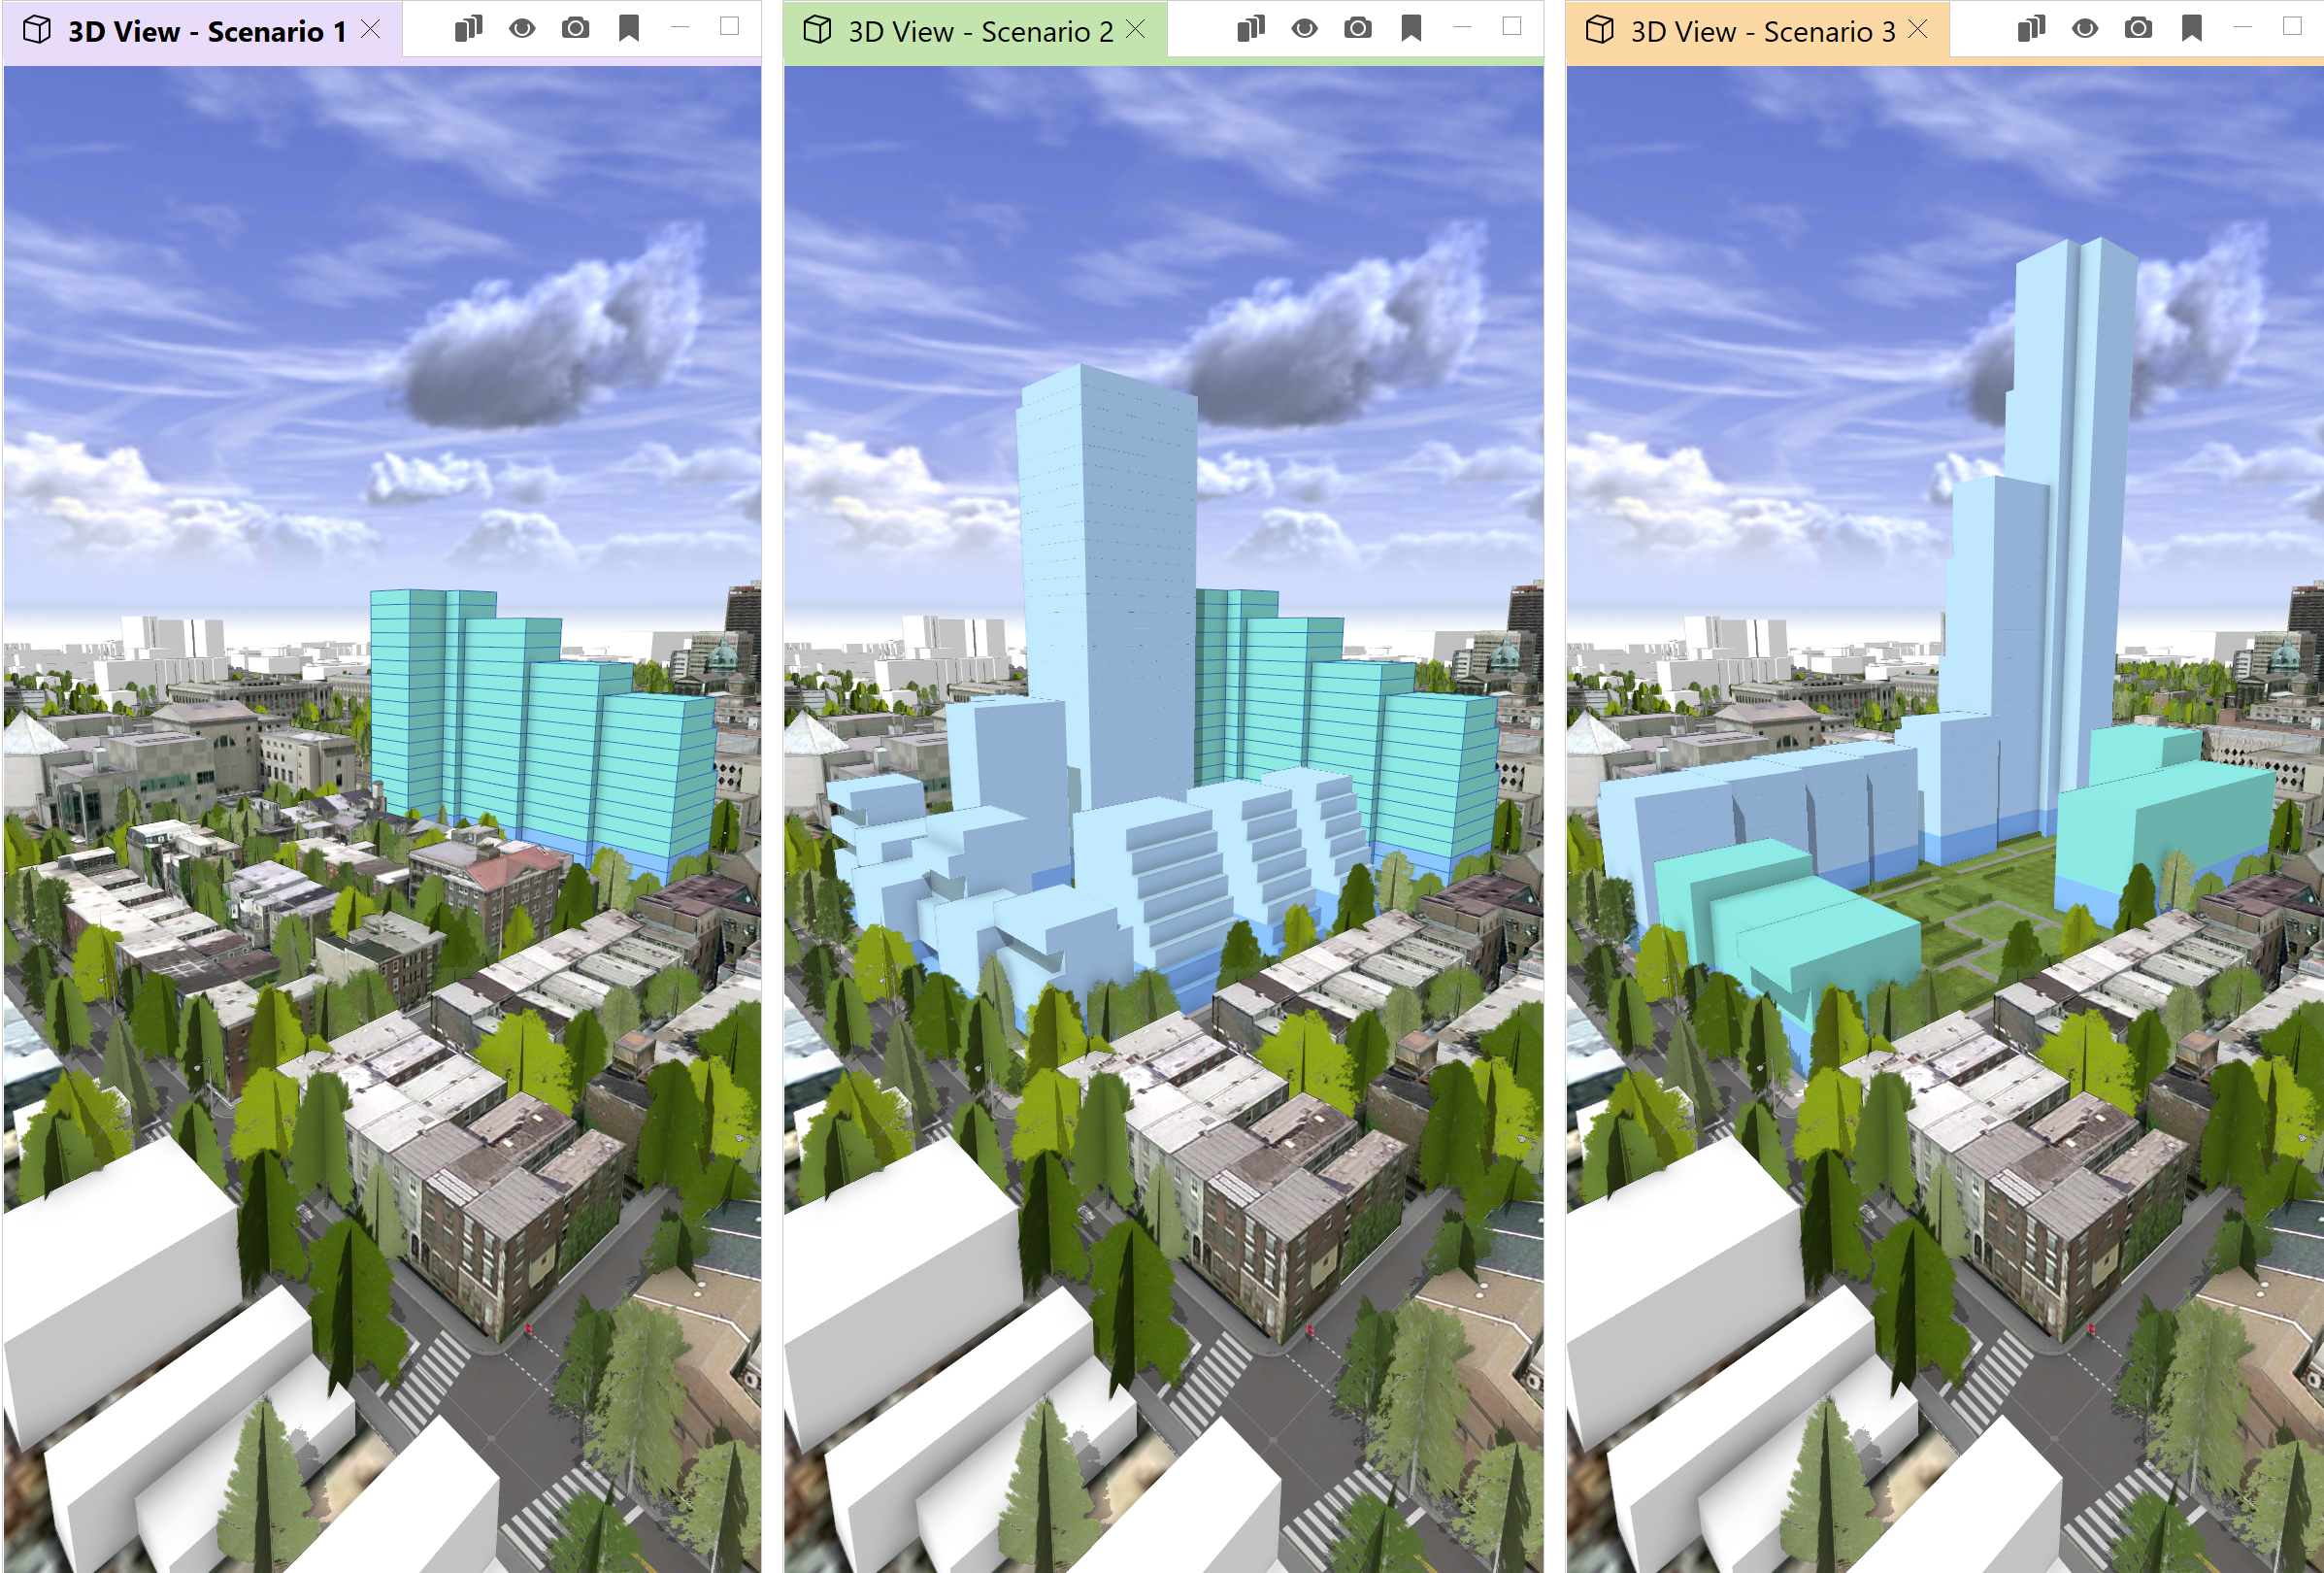 3D Viewports side-by-side with different scenarios